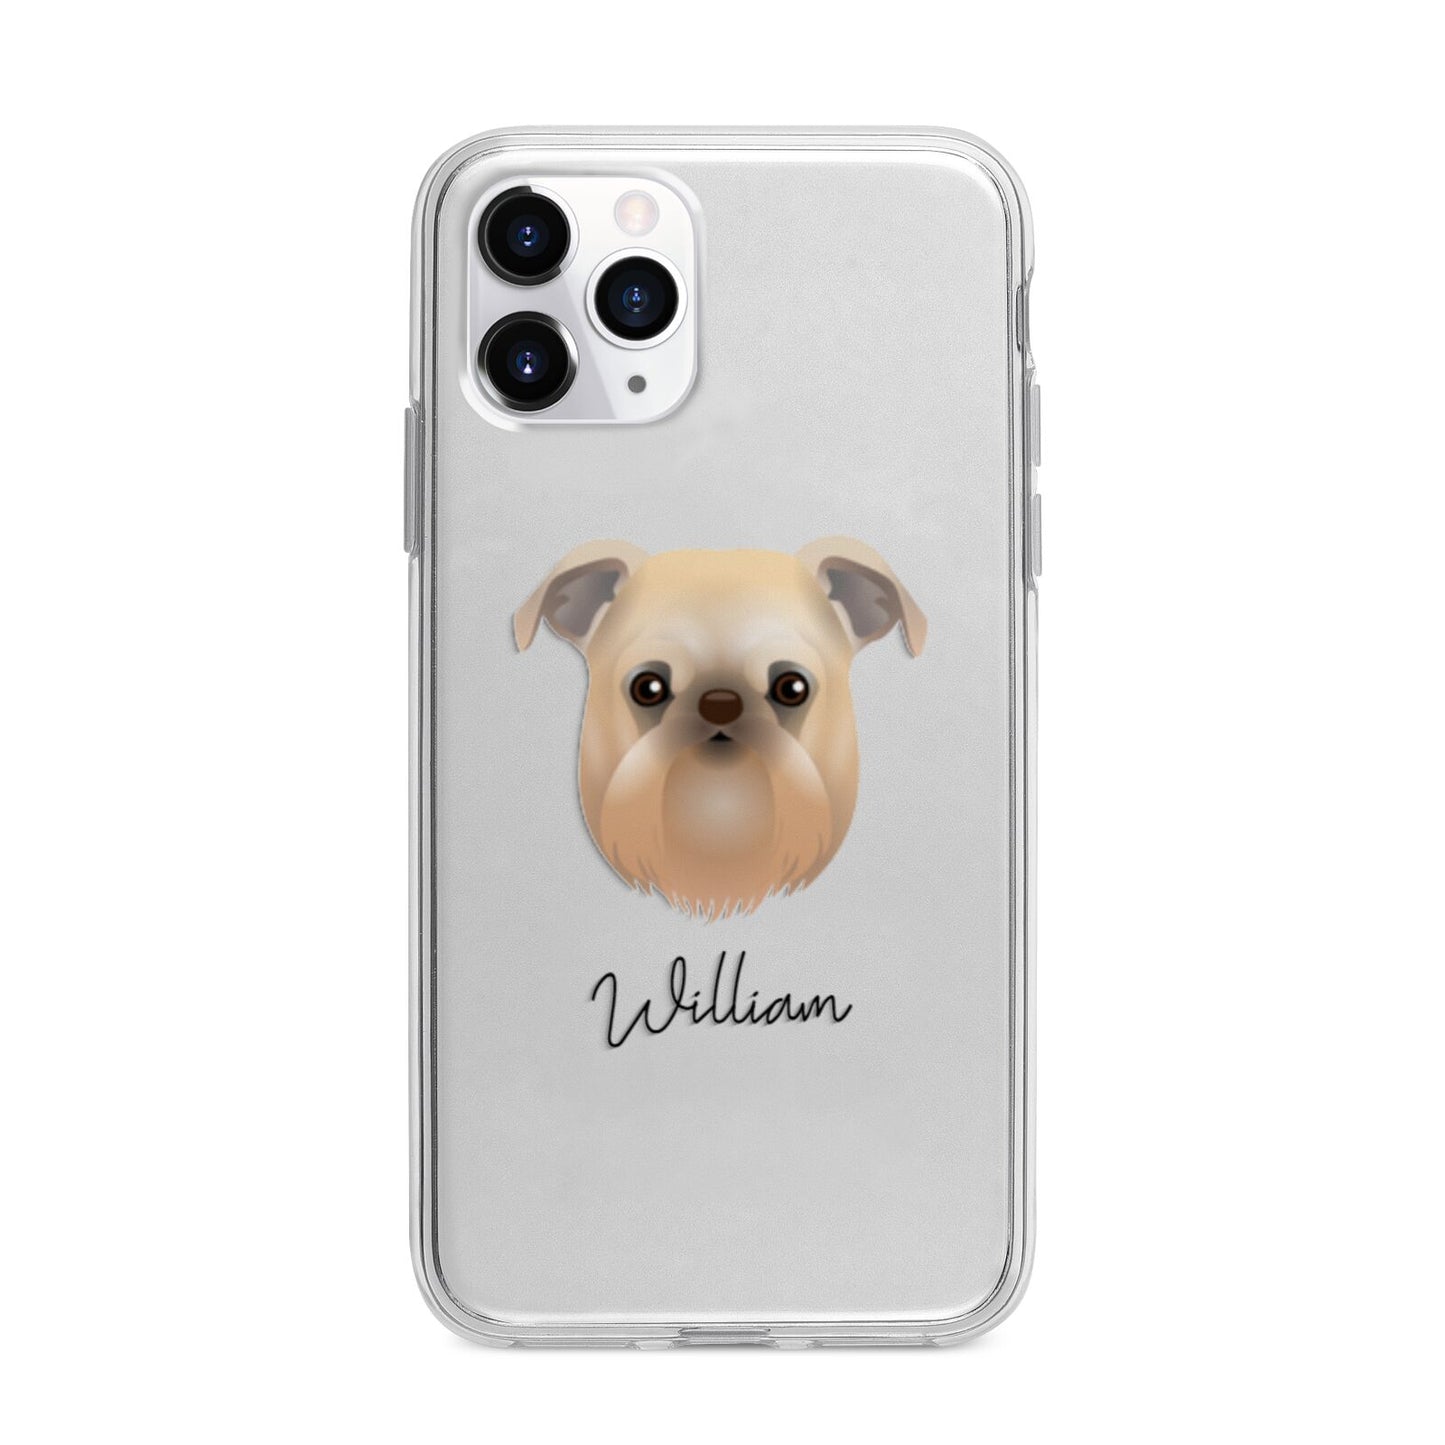 Griffon Bruxellois Personalised Apple iPhone 11 Pro Max in Silver with Bumper Case